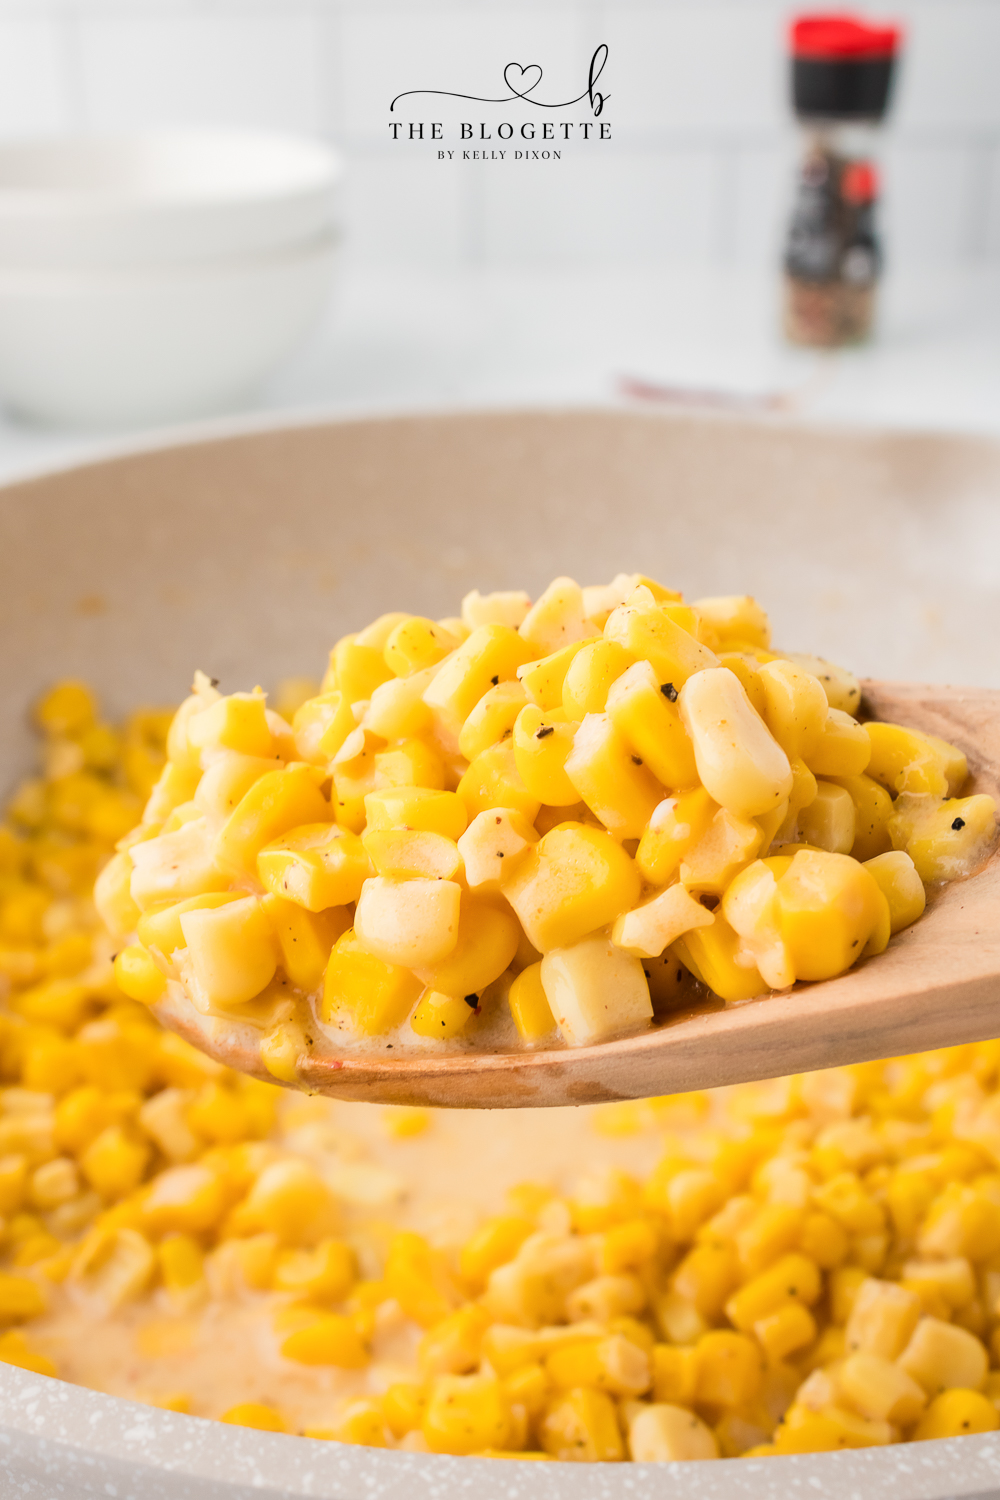 Honey Butter Skillet Corn - Kernels of corn drenched in a sweet, creamy, and delicious honey butter sauce. Done in 15 minutes!